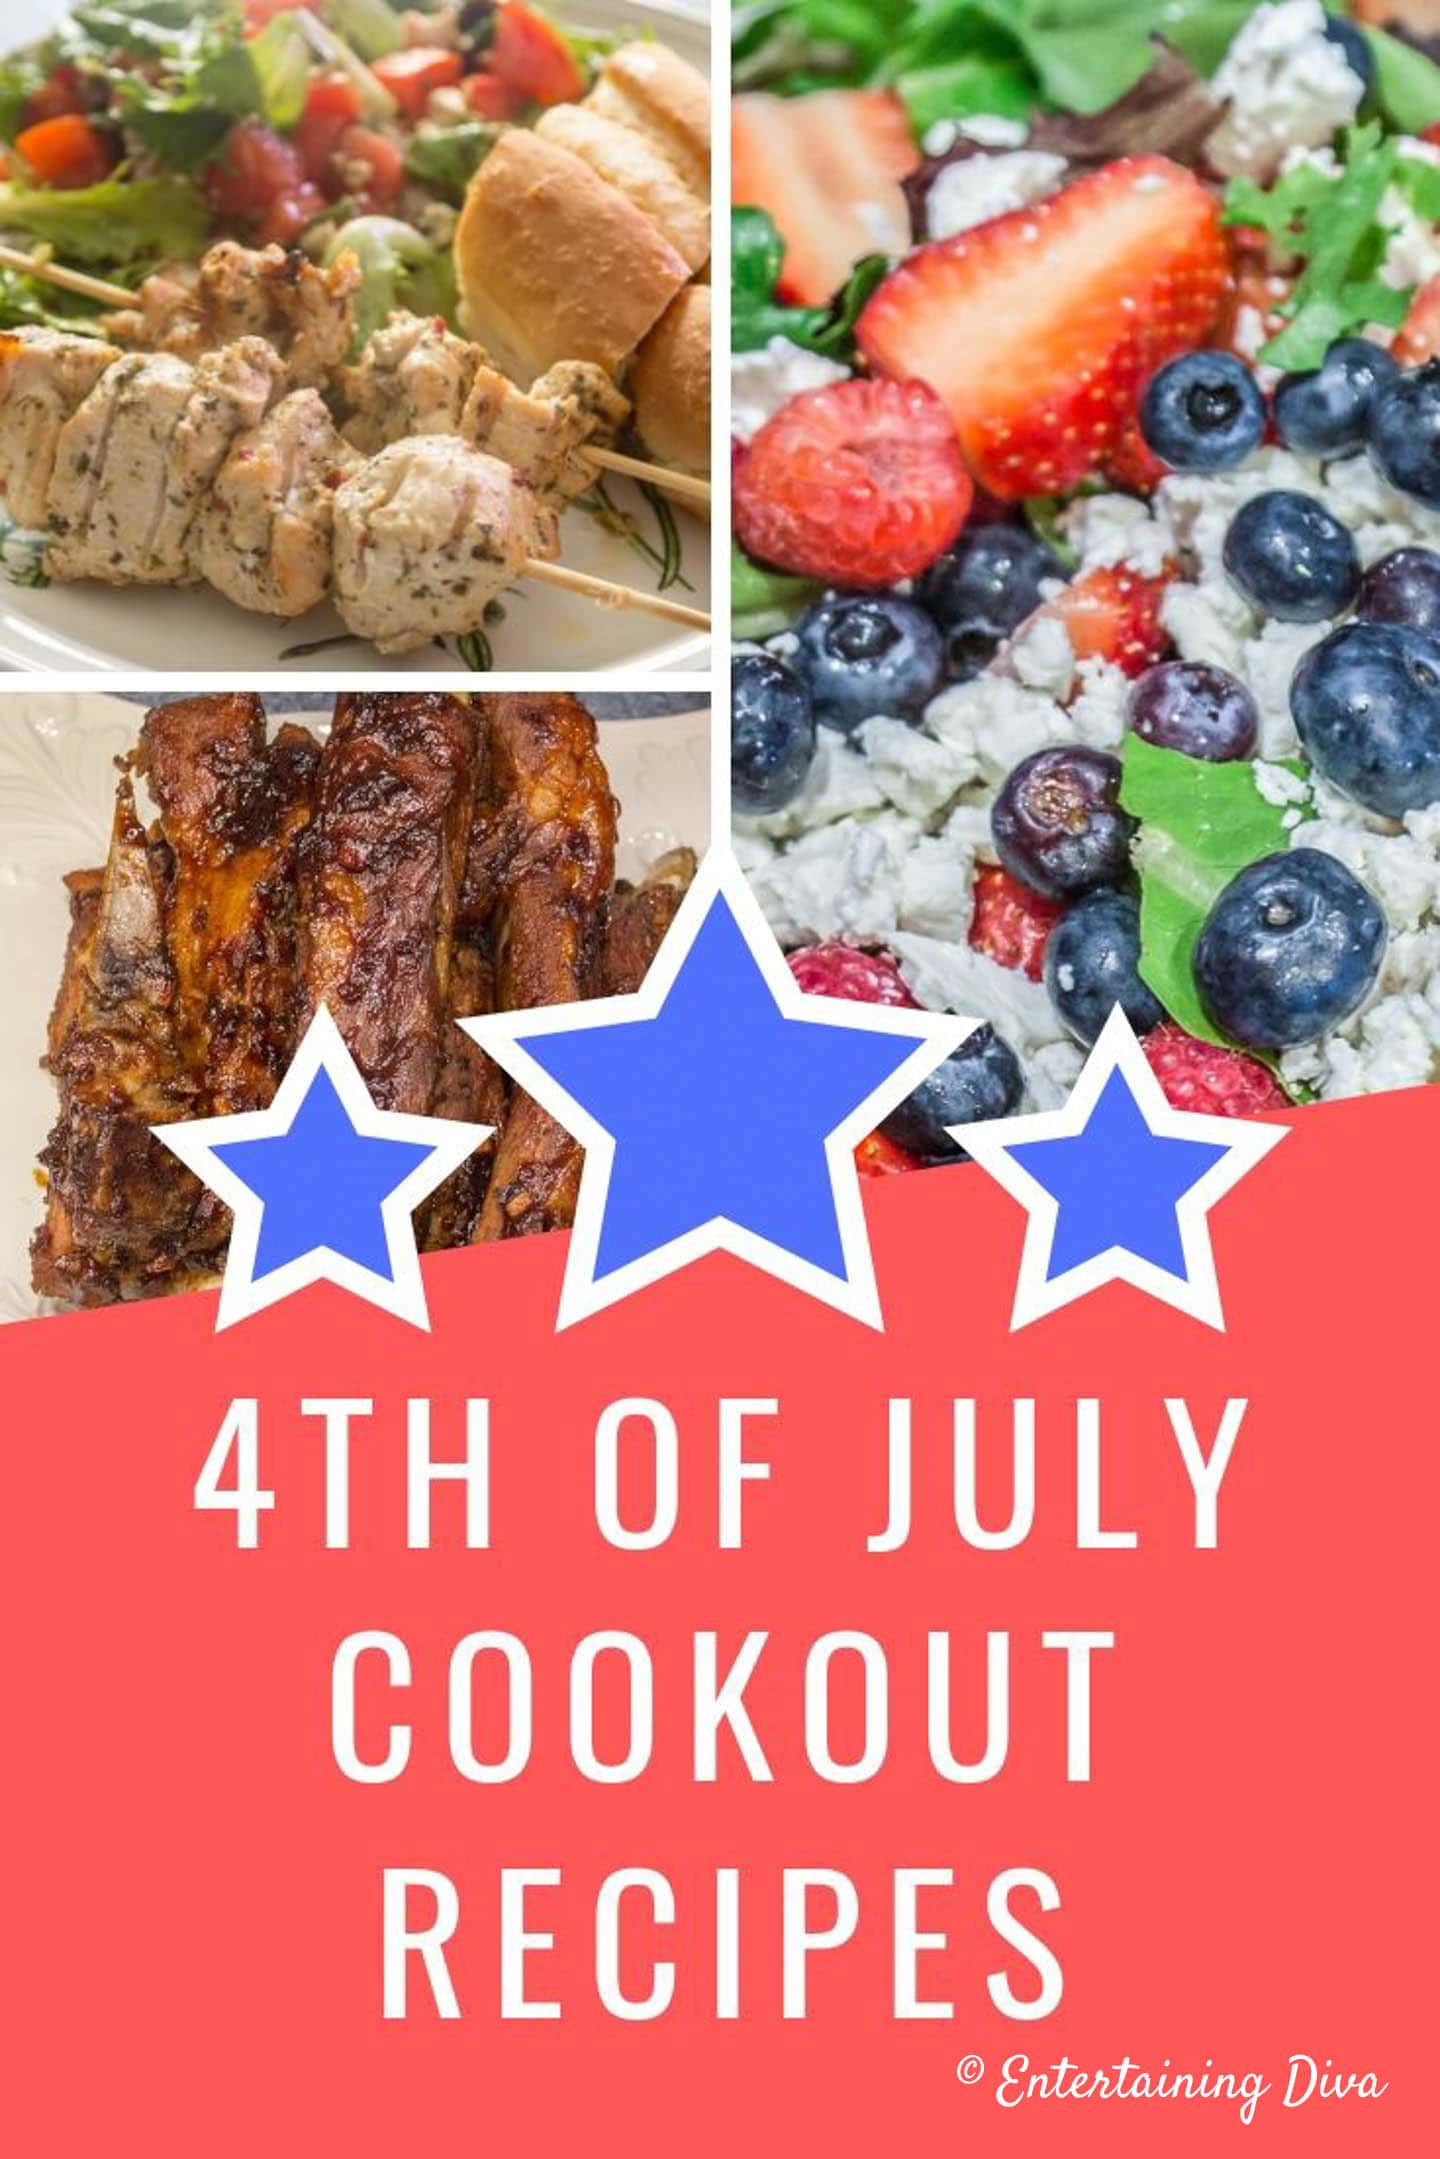 Best 4th of July Menu For a Cookout - Entertaining Diva